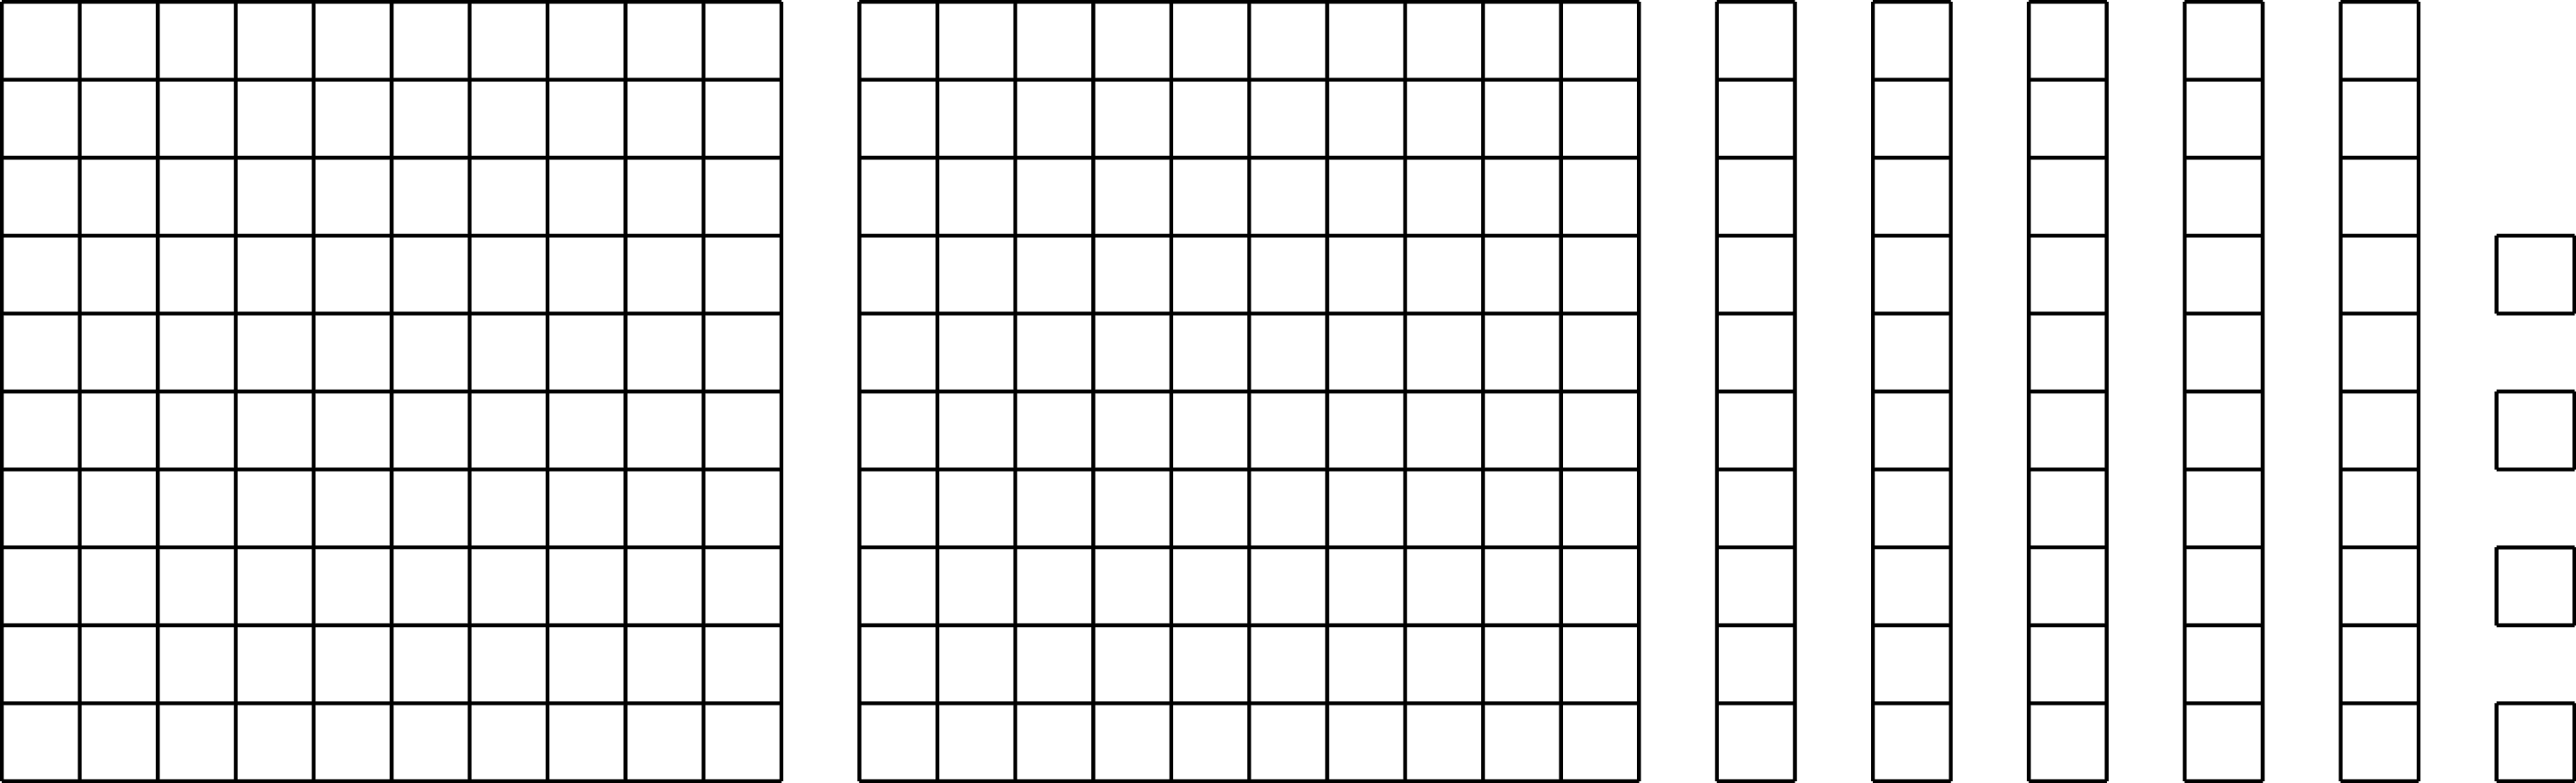 A diagram of two large squares, five rectangles, and four small squares. A medium rectangle is made up of 10 small squares aligned vertically. A large square is made up of 10 medium rectangles placed side by side.